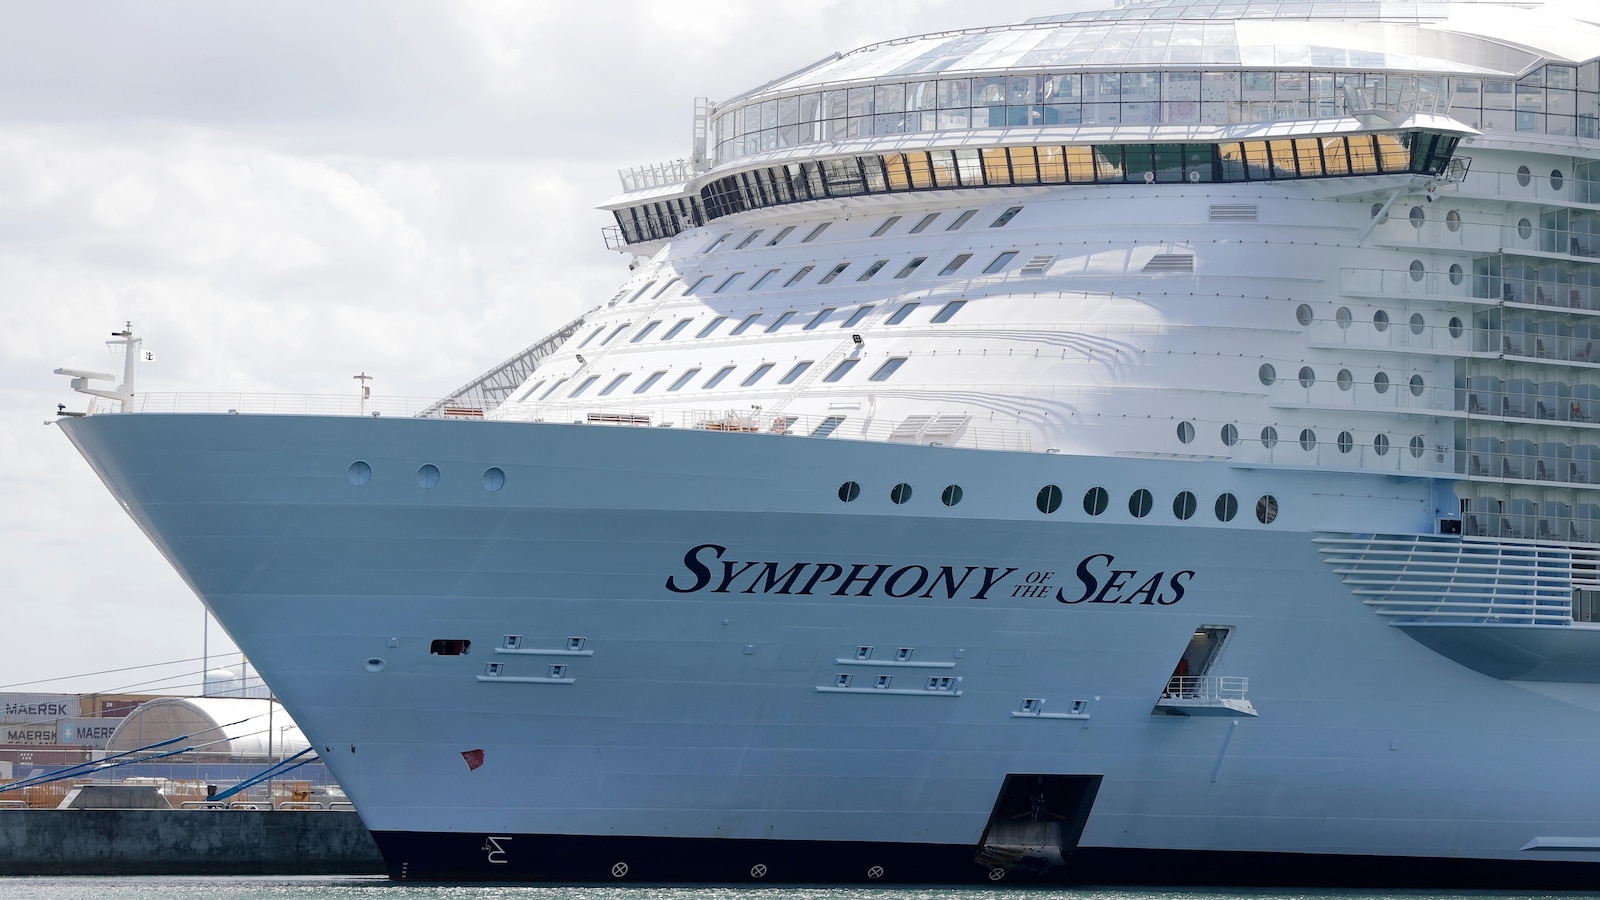 Allegations of a Royal Caribbean cabin attendant concealing cameras in bathrooms